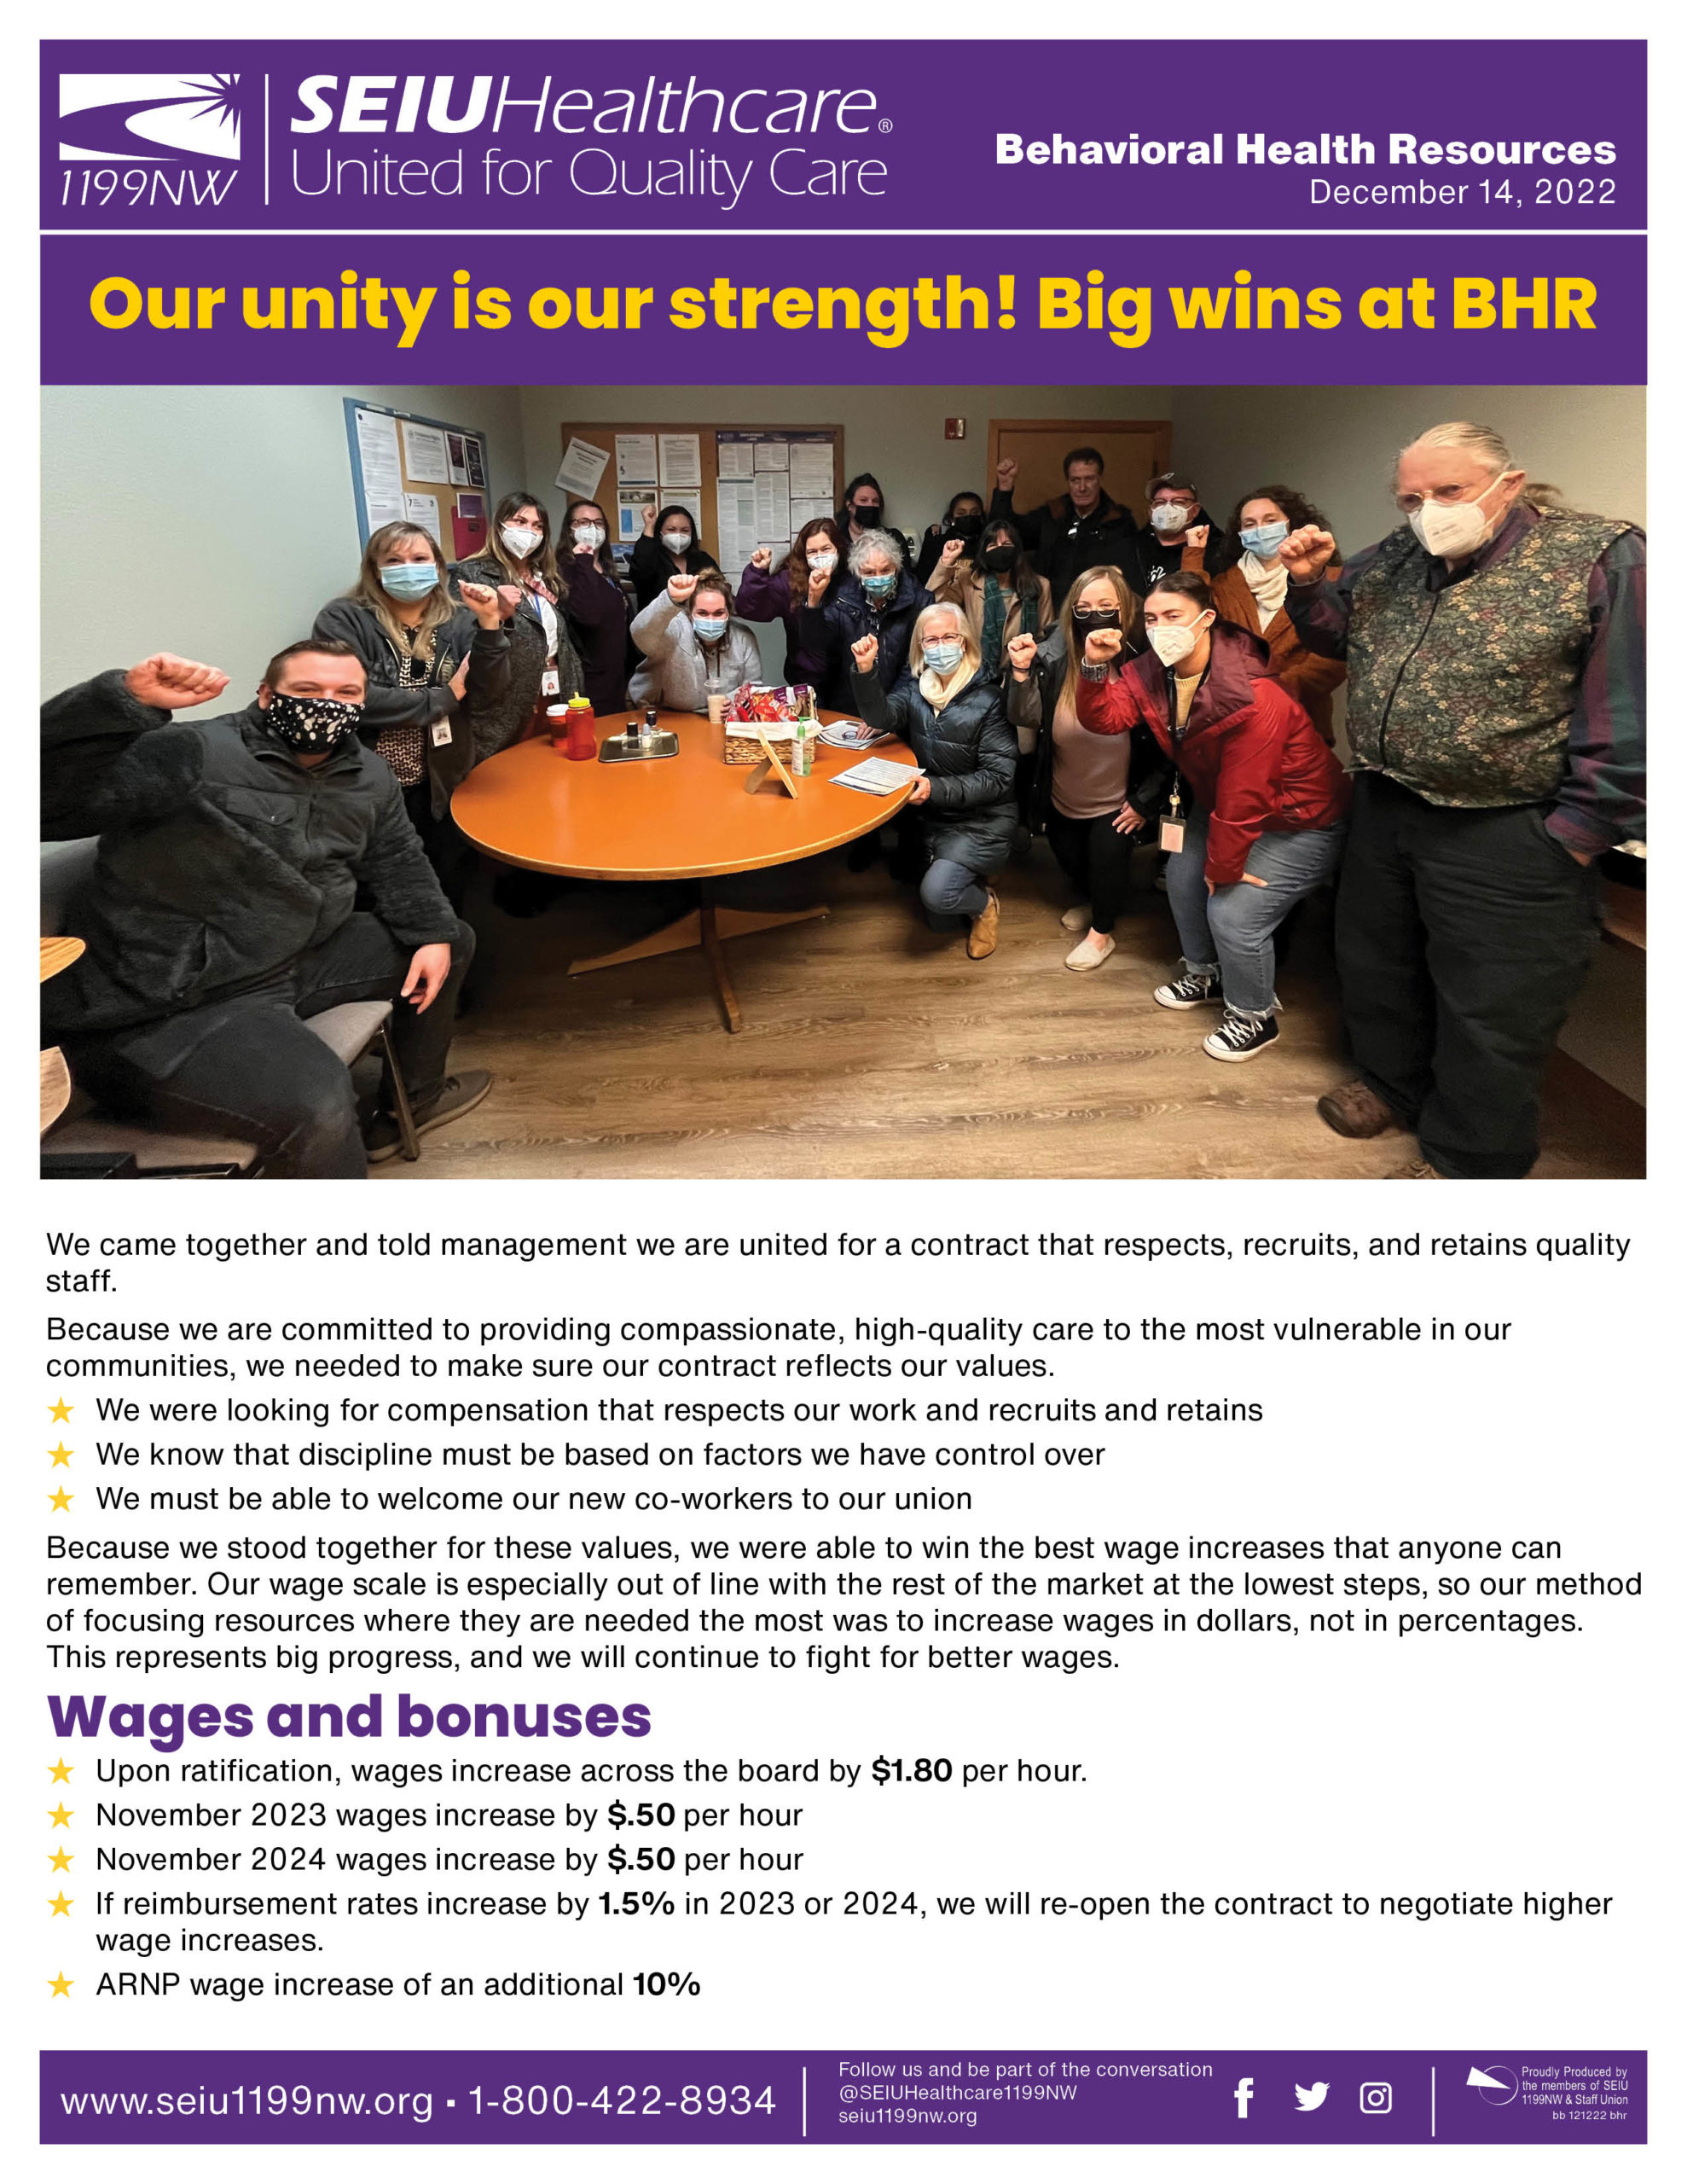 Our unity is our strength! Big wins at BHR